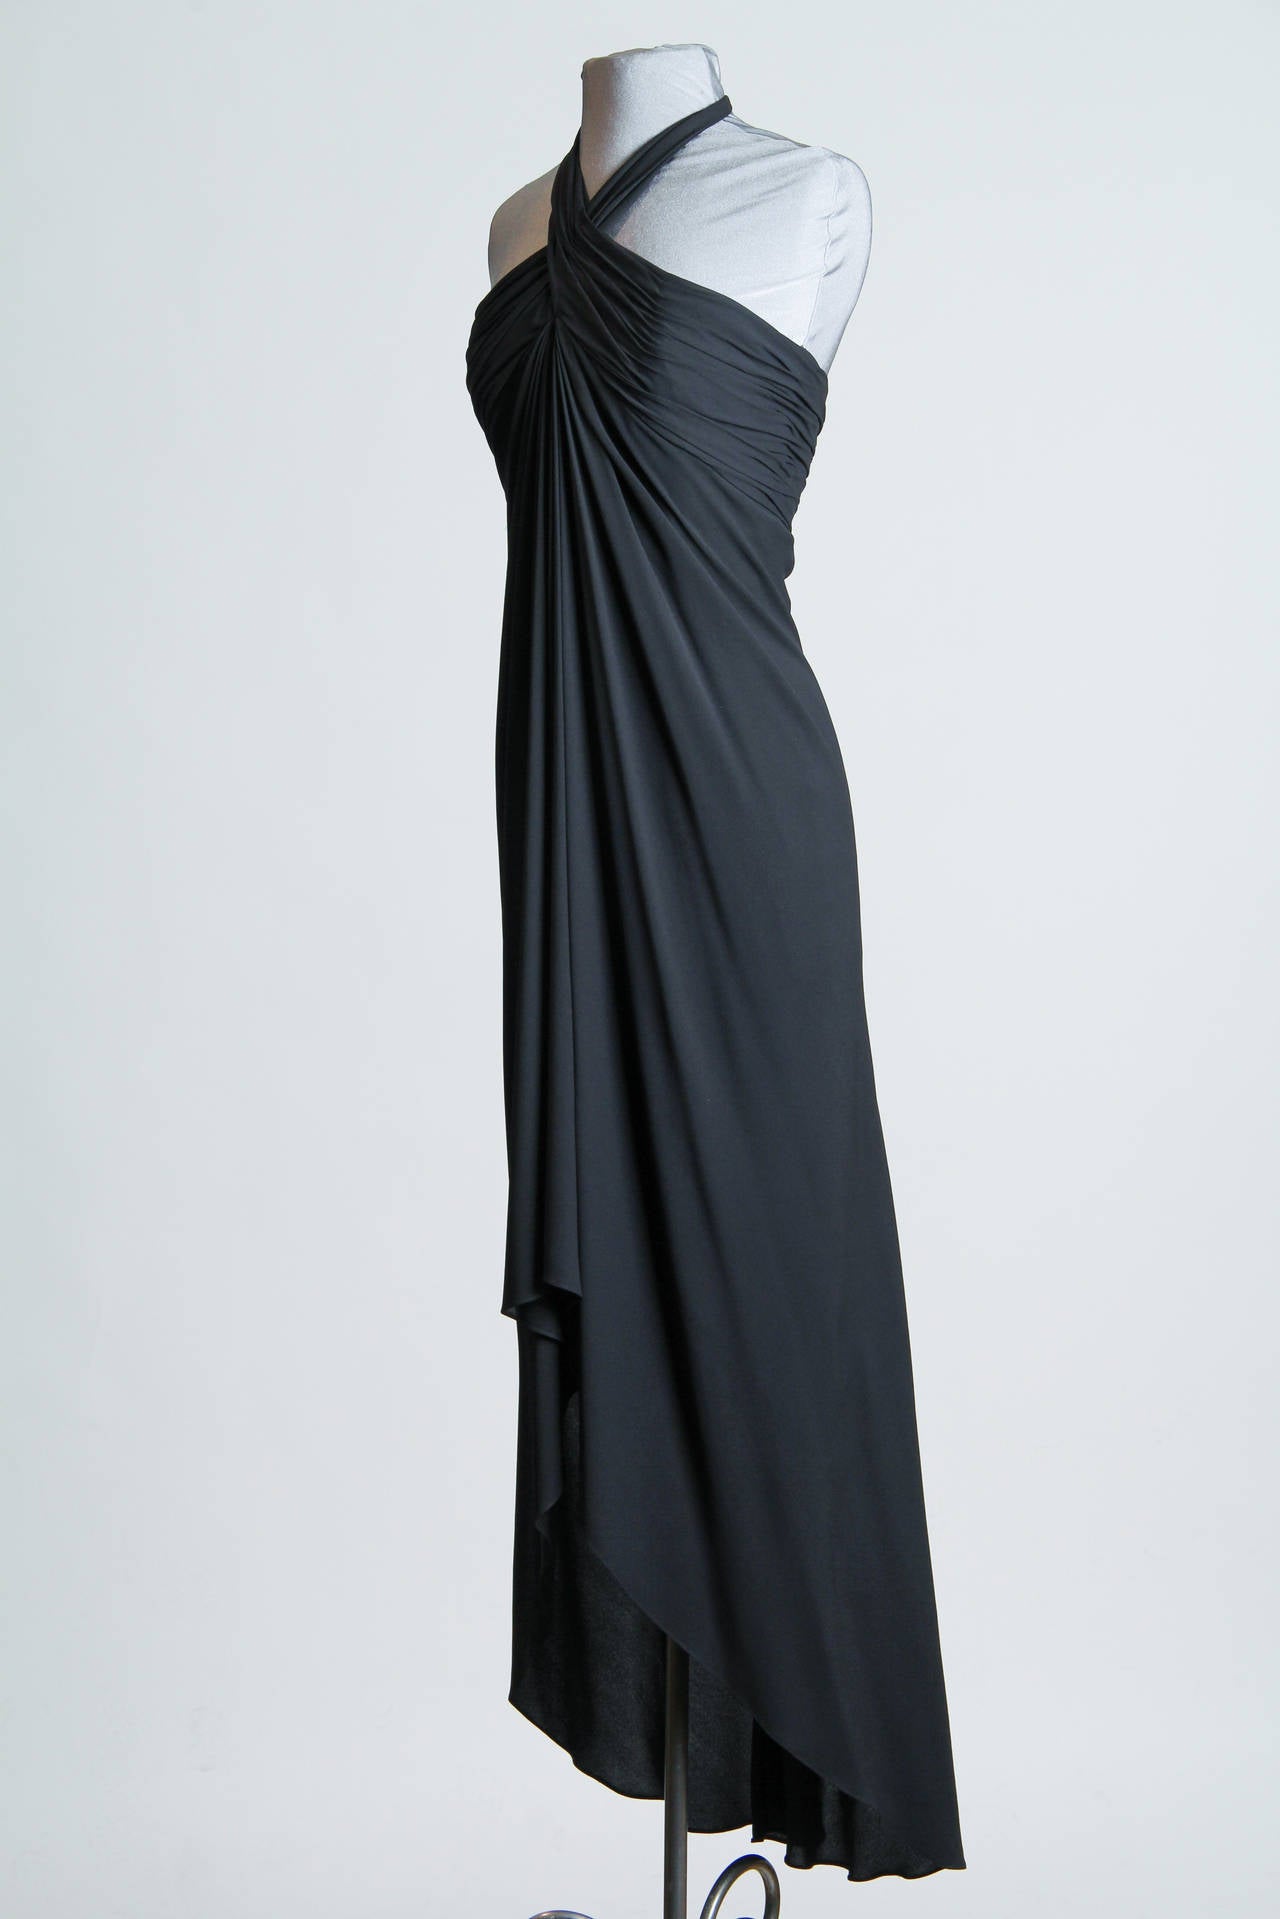 This flawlessly gorgeous gown dates to the days when Oscar himself was rubbing shoulders with Halston and Liza at studio 54. However the effortless design is anything but. The draped bodice has been hand stitched down to a fitted and boned bodice